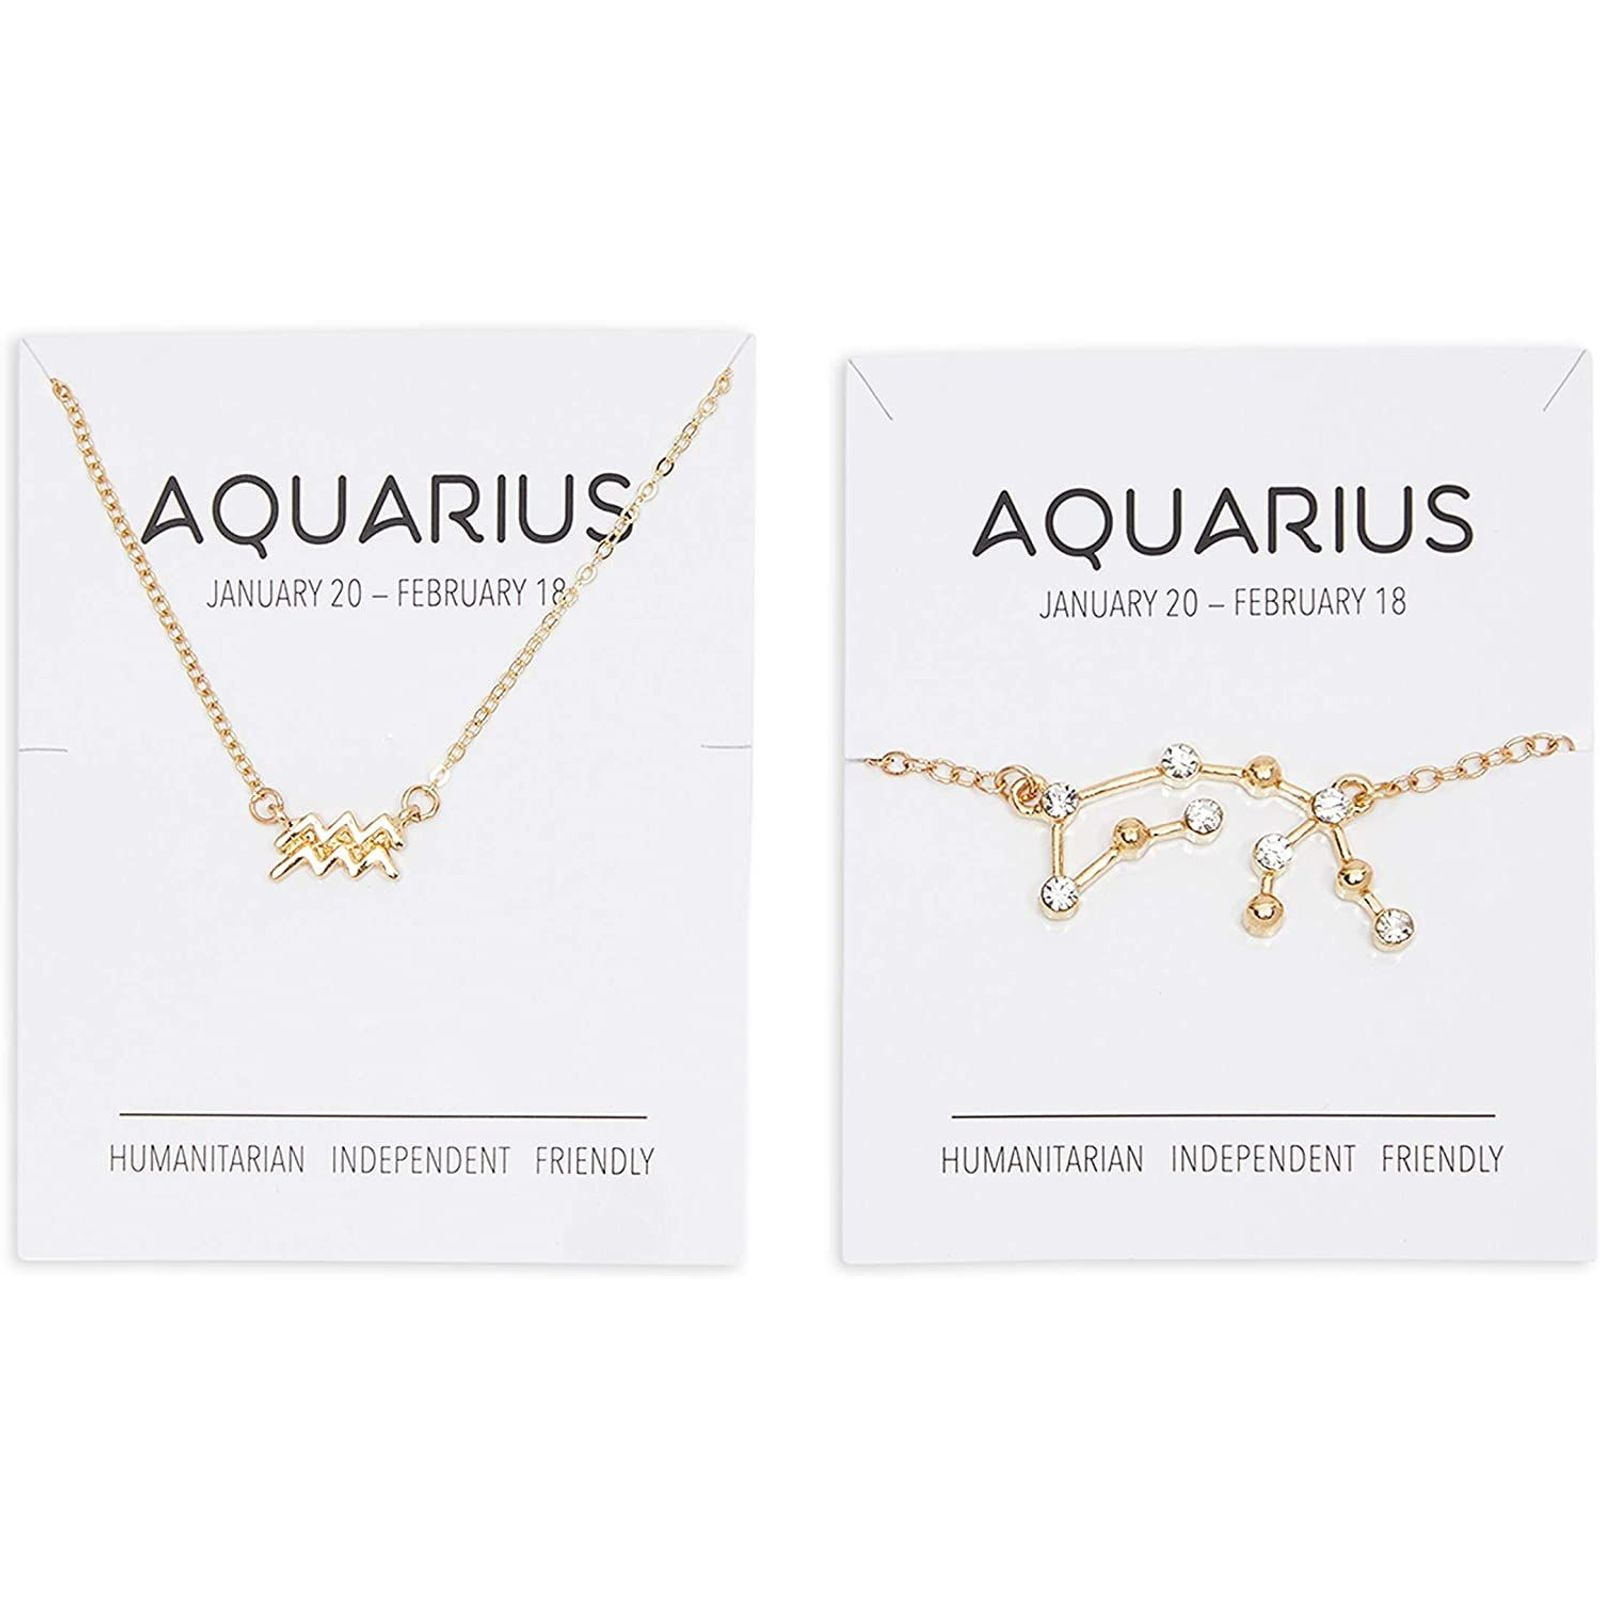 Earrings Aquarius Zodiac Constellation Sign Earrings Necklace Set Gold Aquarius Star Celestial Astrology Horoscope Jewelry gift box Personalized Gifts For Mom